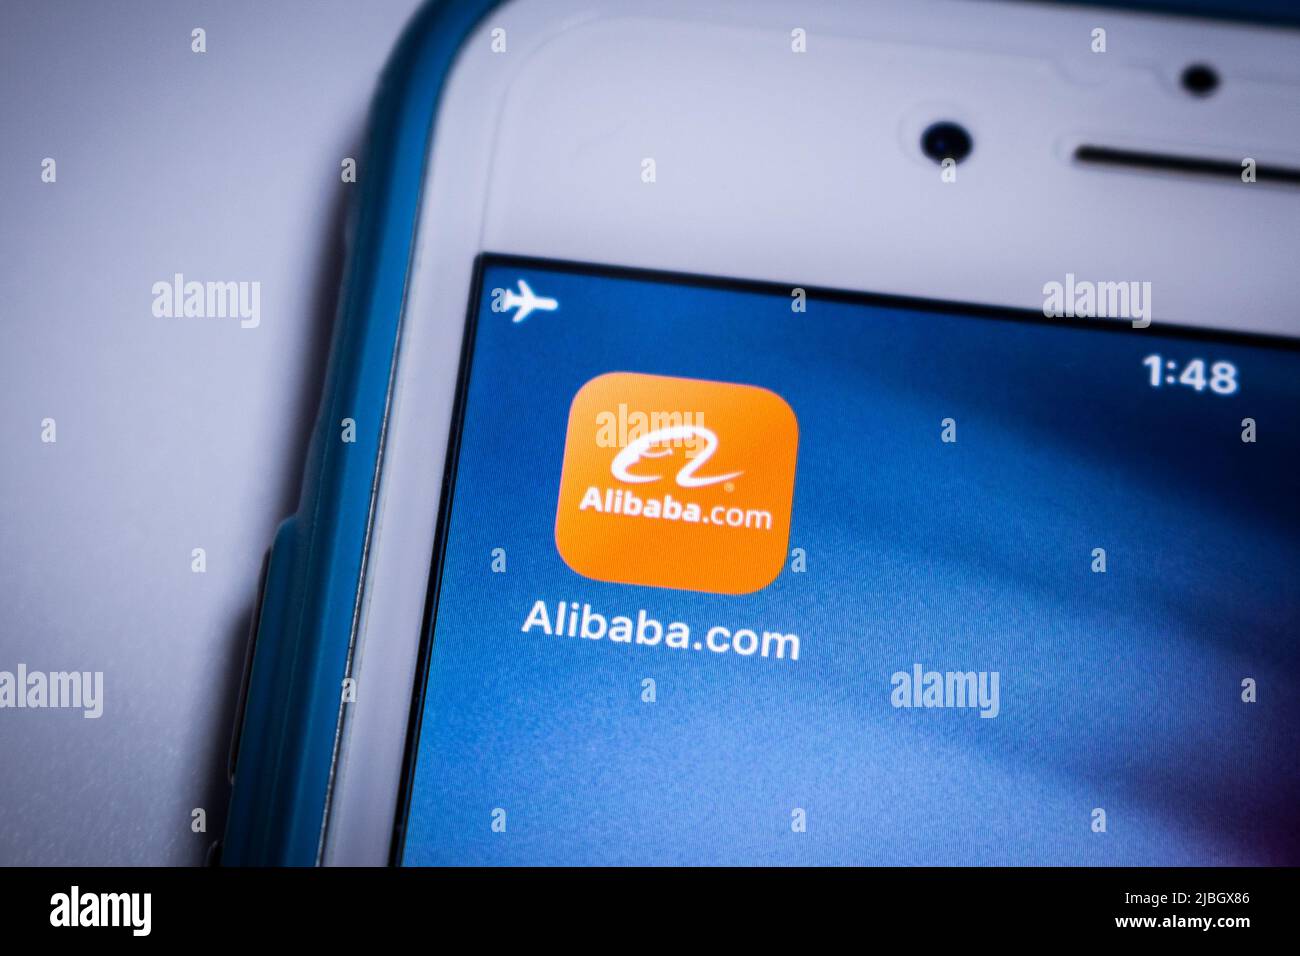 Alibaba app on iPhone. Alibaba Group, Chinese multinational conglomerate holding, is the world's largest retailer and e-commerce company. Stock Photo